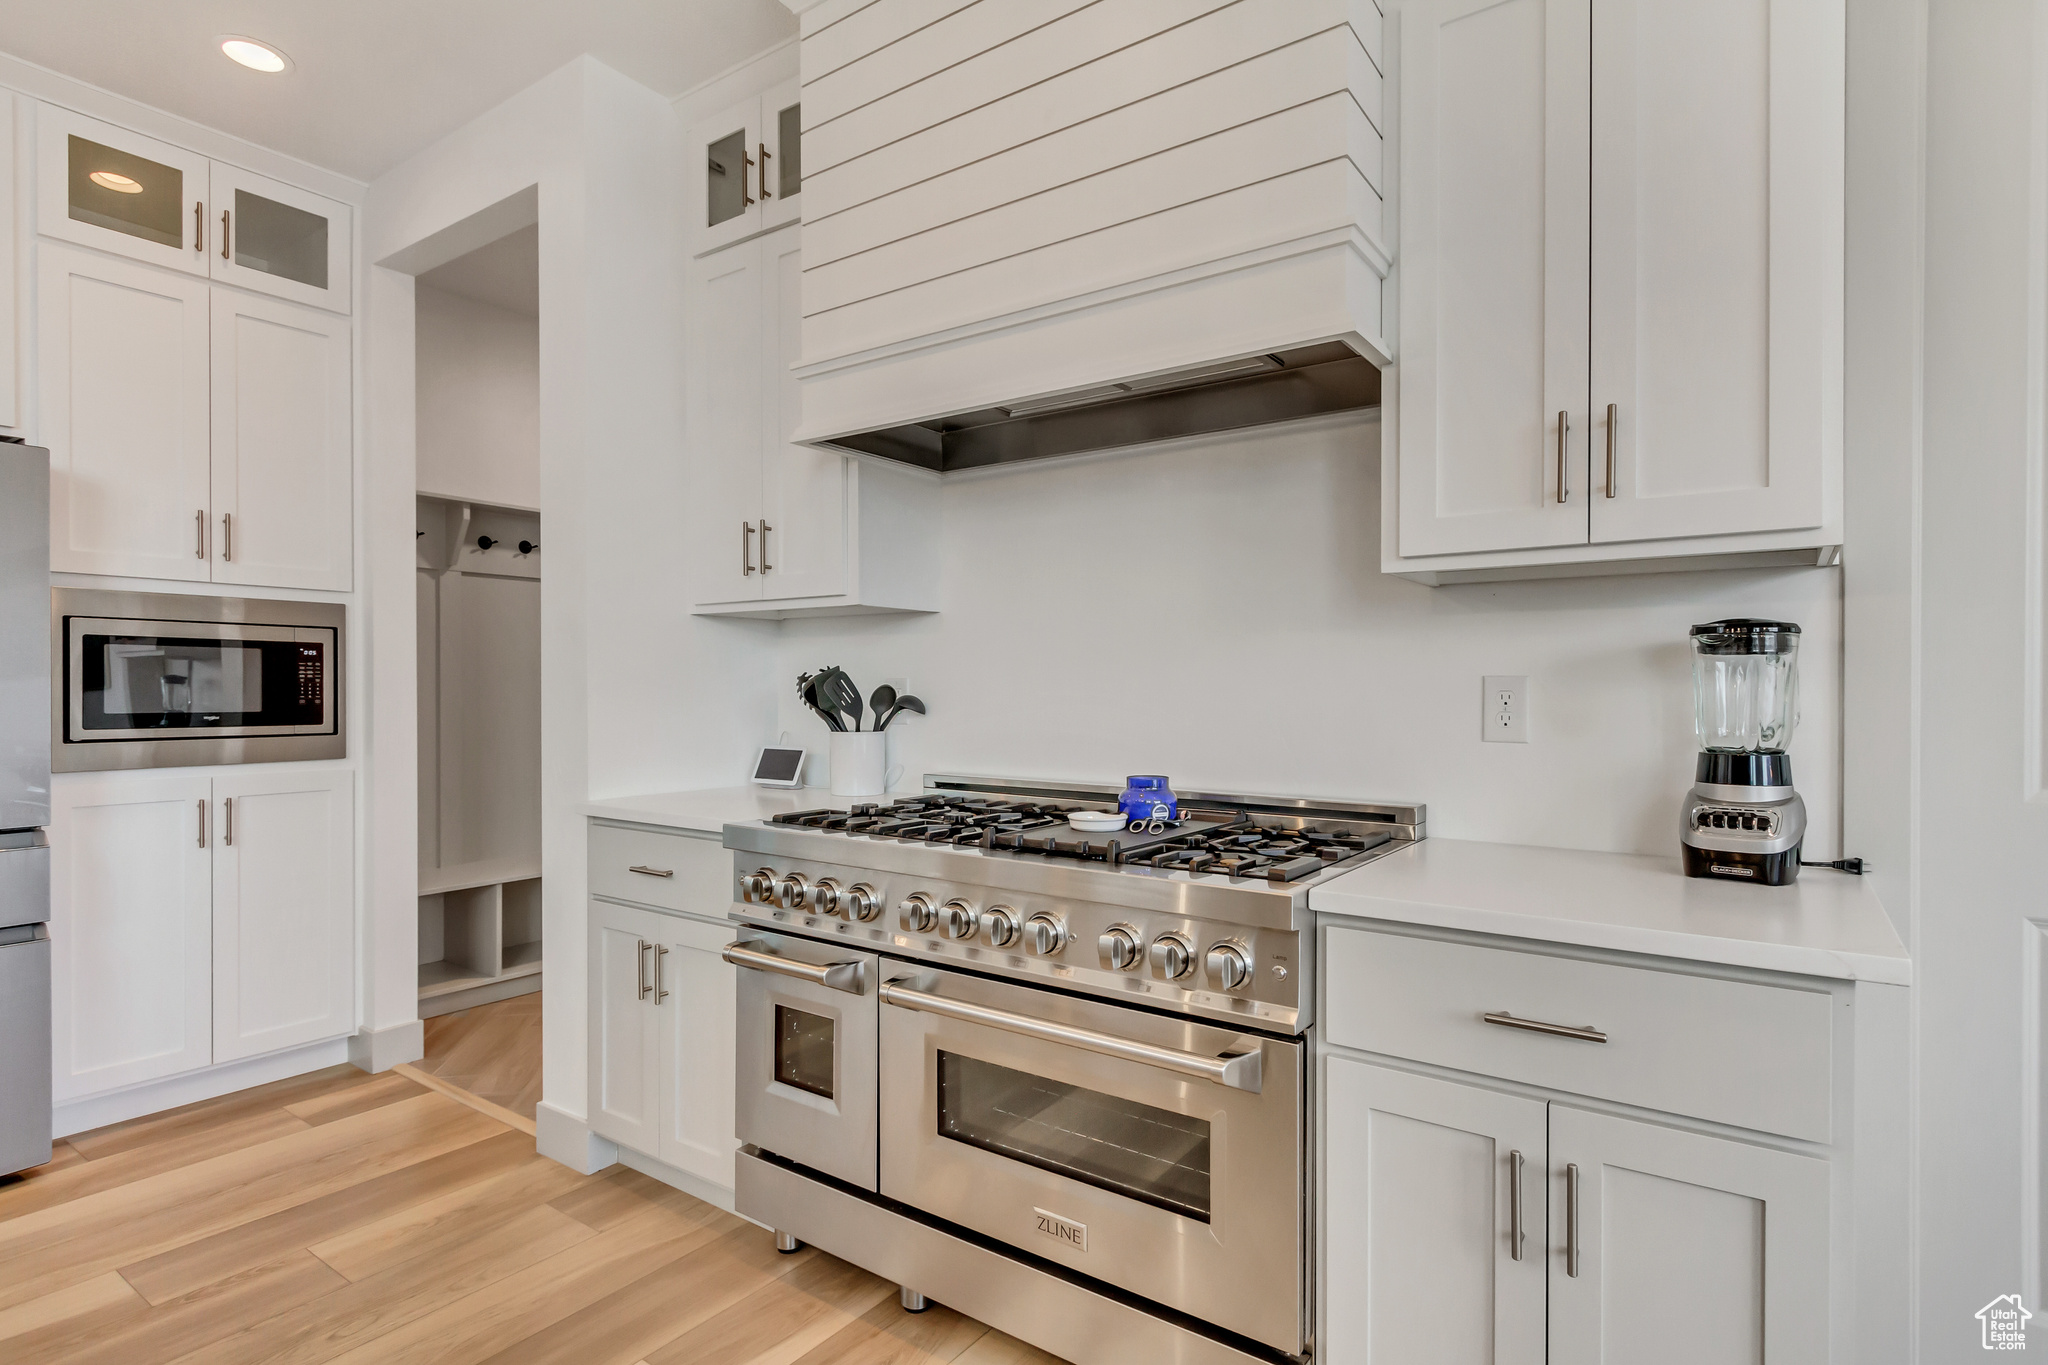 Kitchen featuring white cabinets, appliances with stainless steel finishes, custom range hood, and light hardwood / wood-style flooring